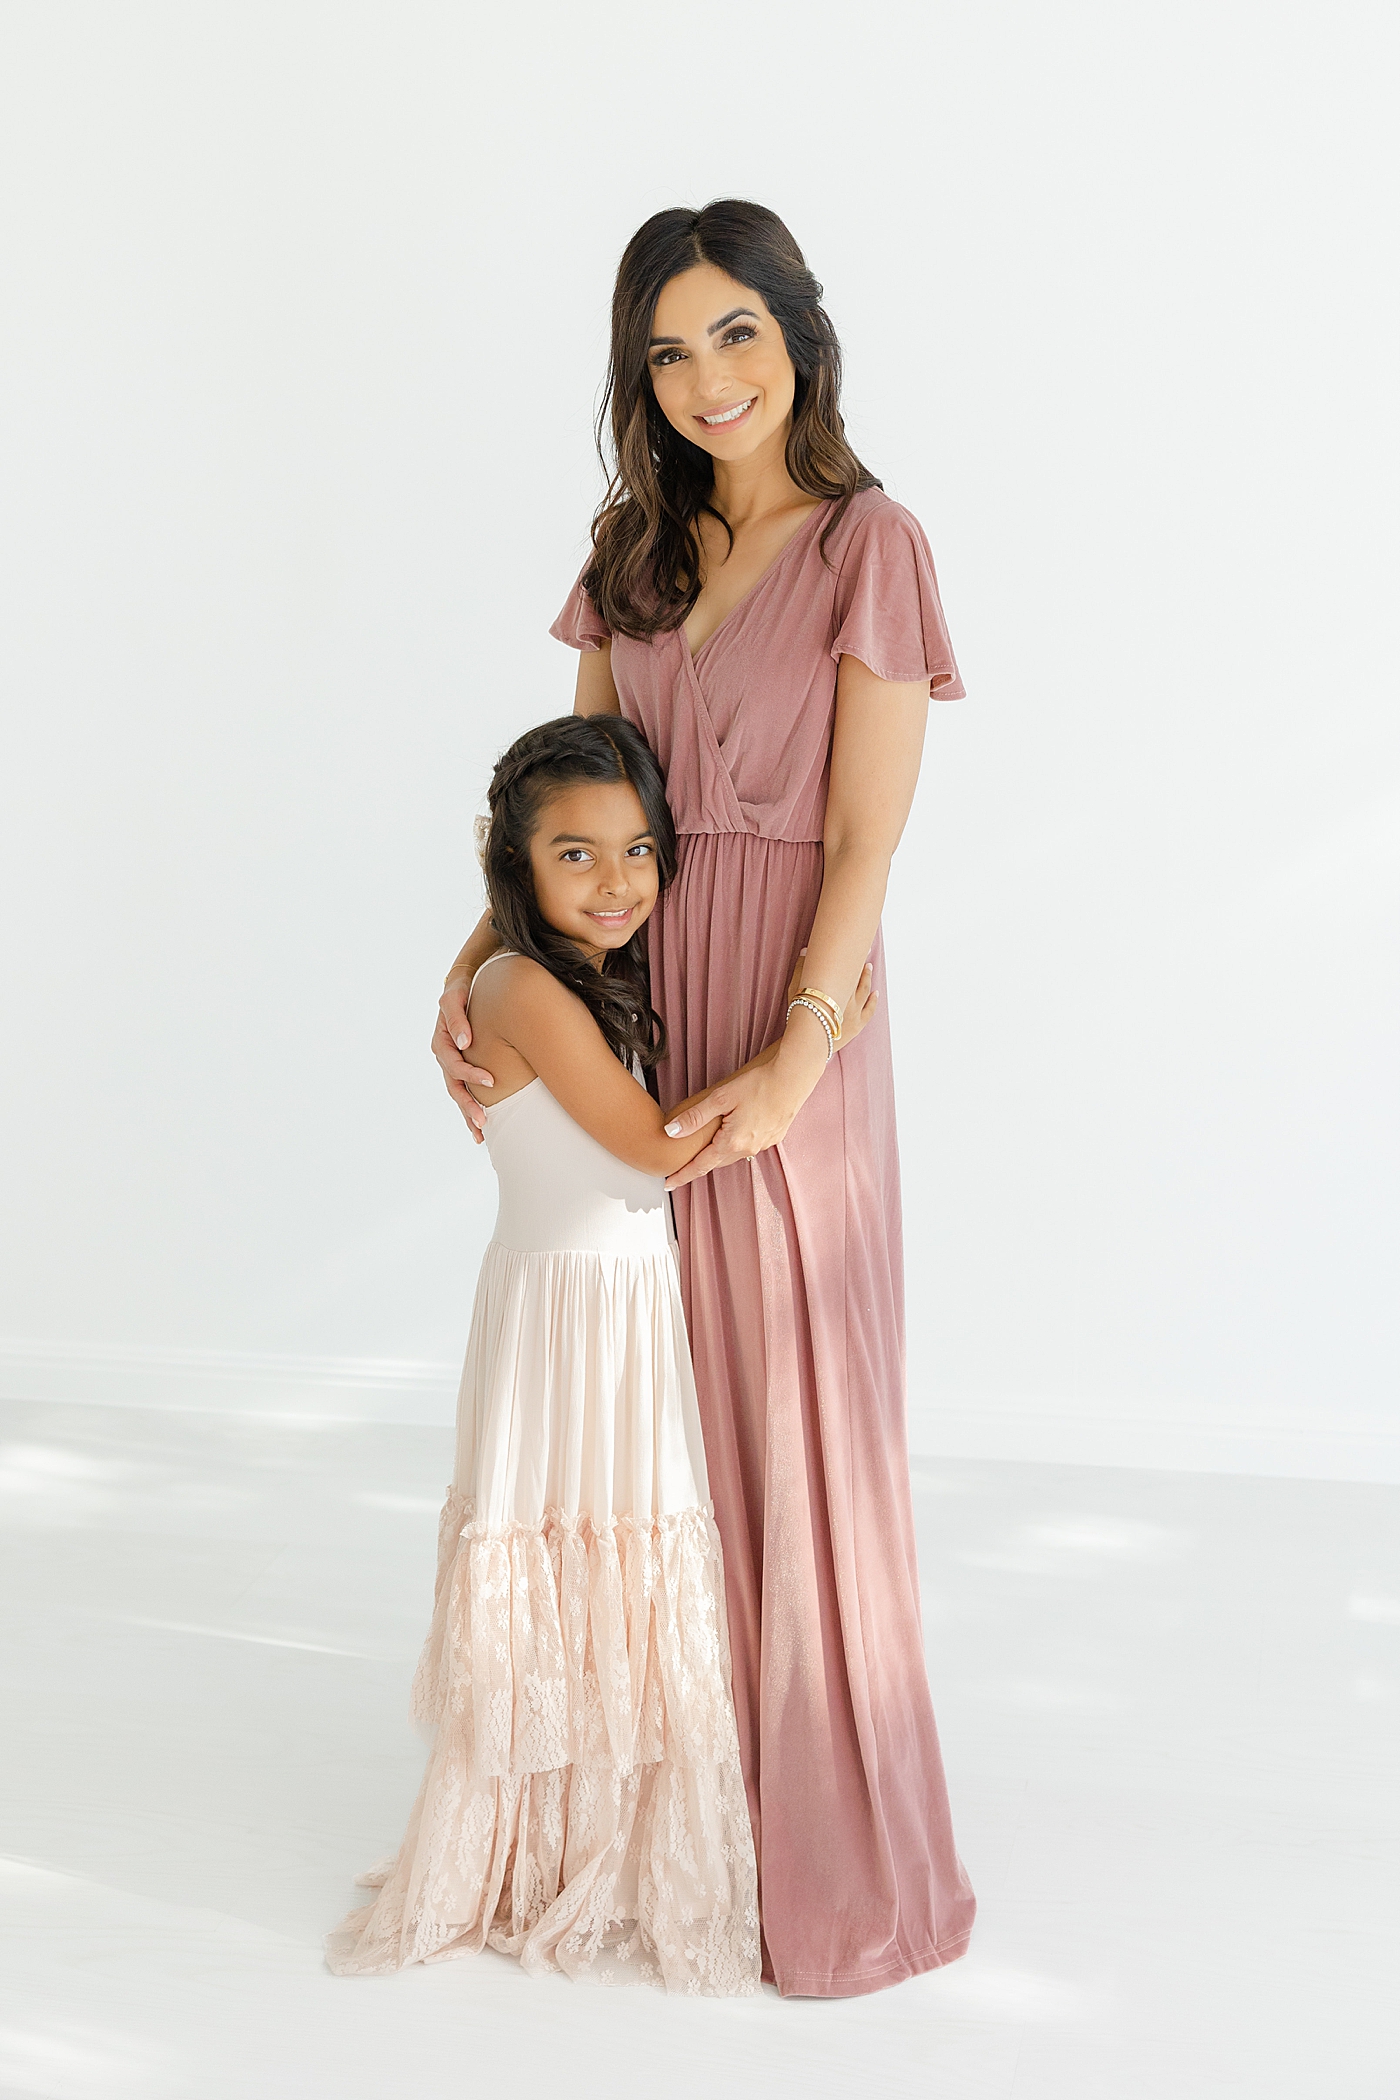 Mom in long pink dress hugging her daughter | Image by Sana Ahmed Photography